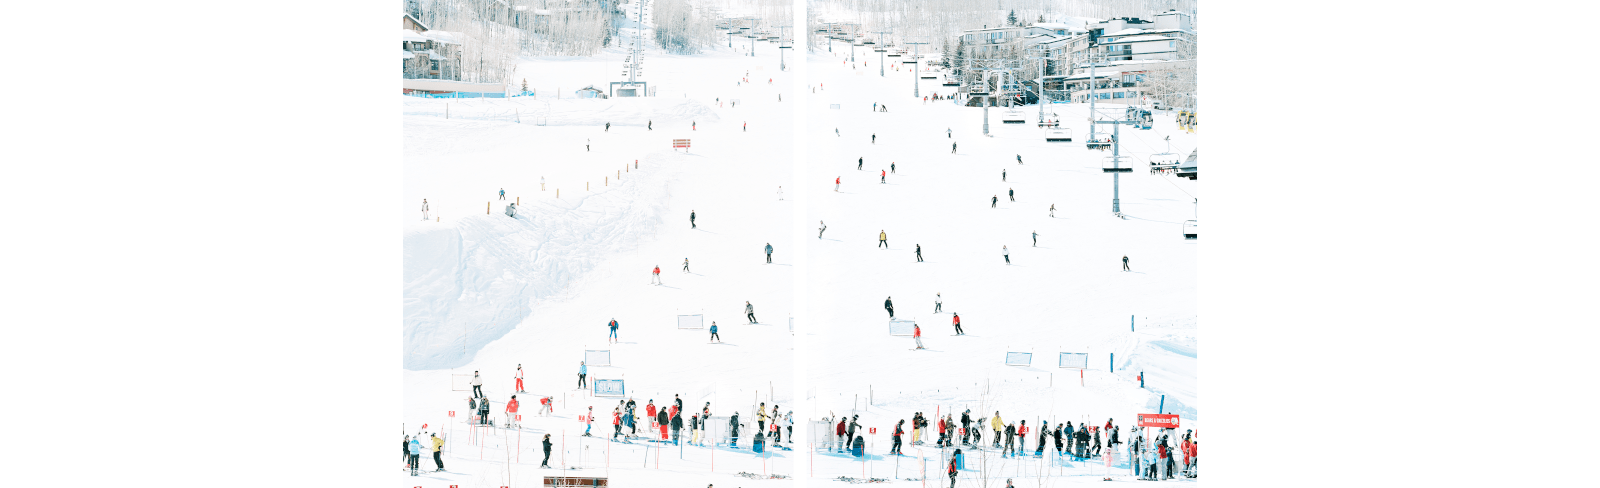 a collage of people skiing